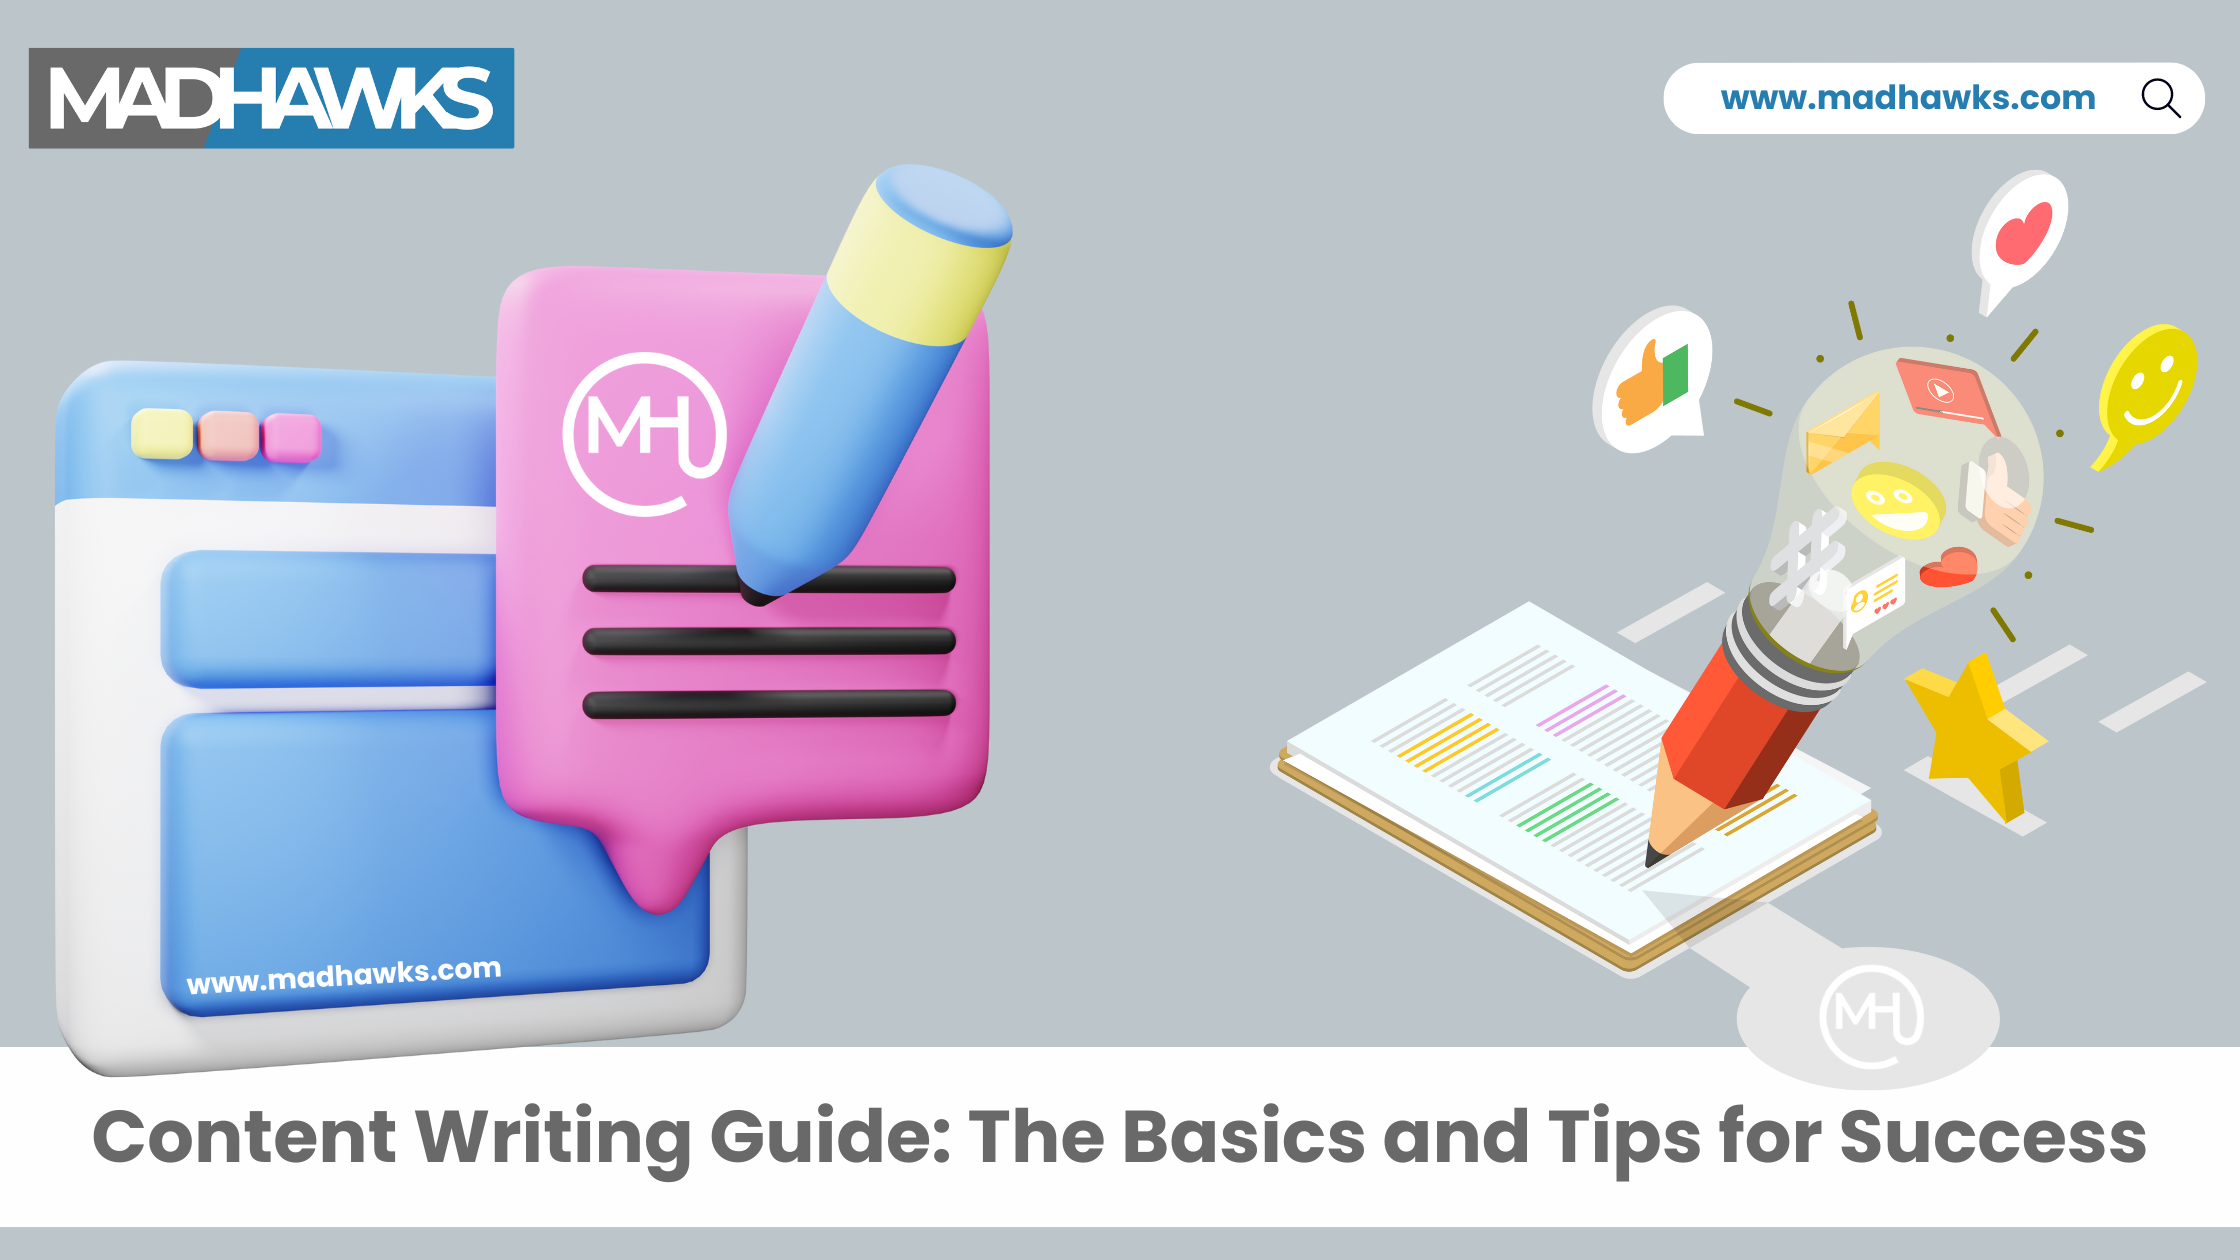 Content Writing Guide: The Basics and Tips for Success